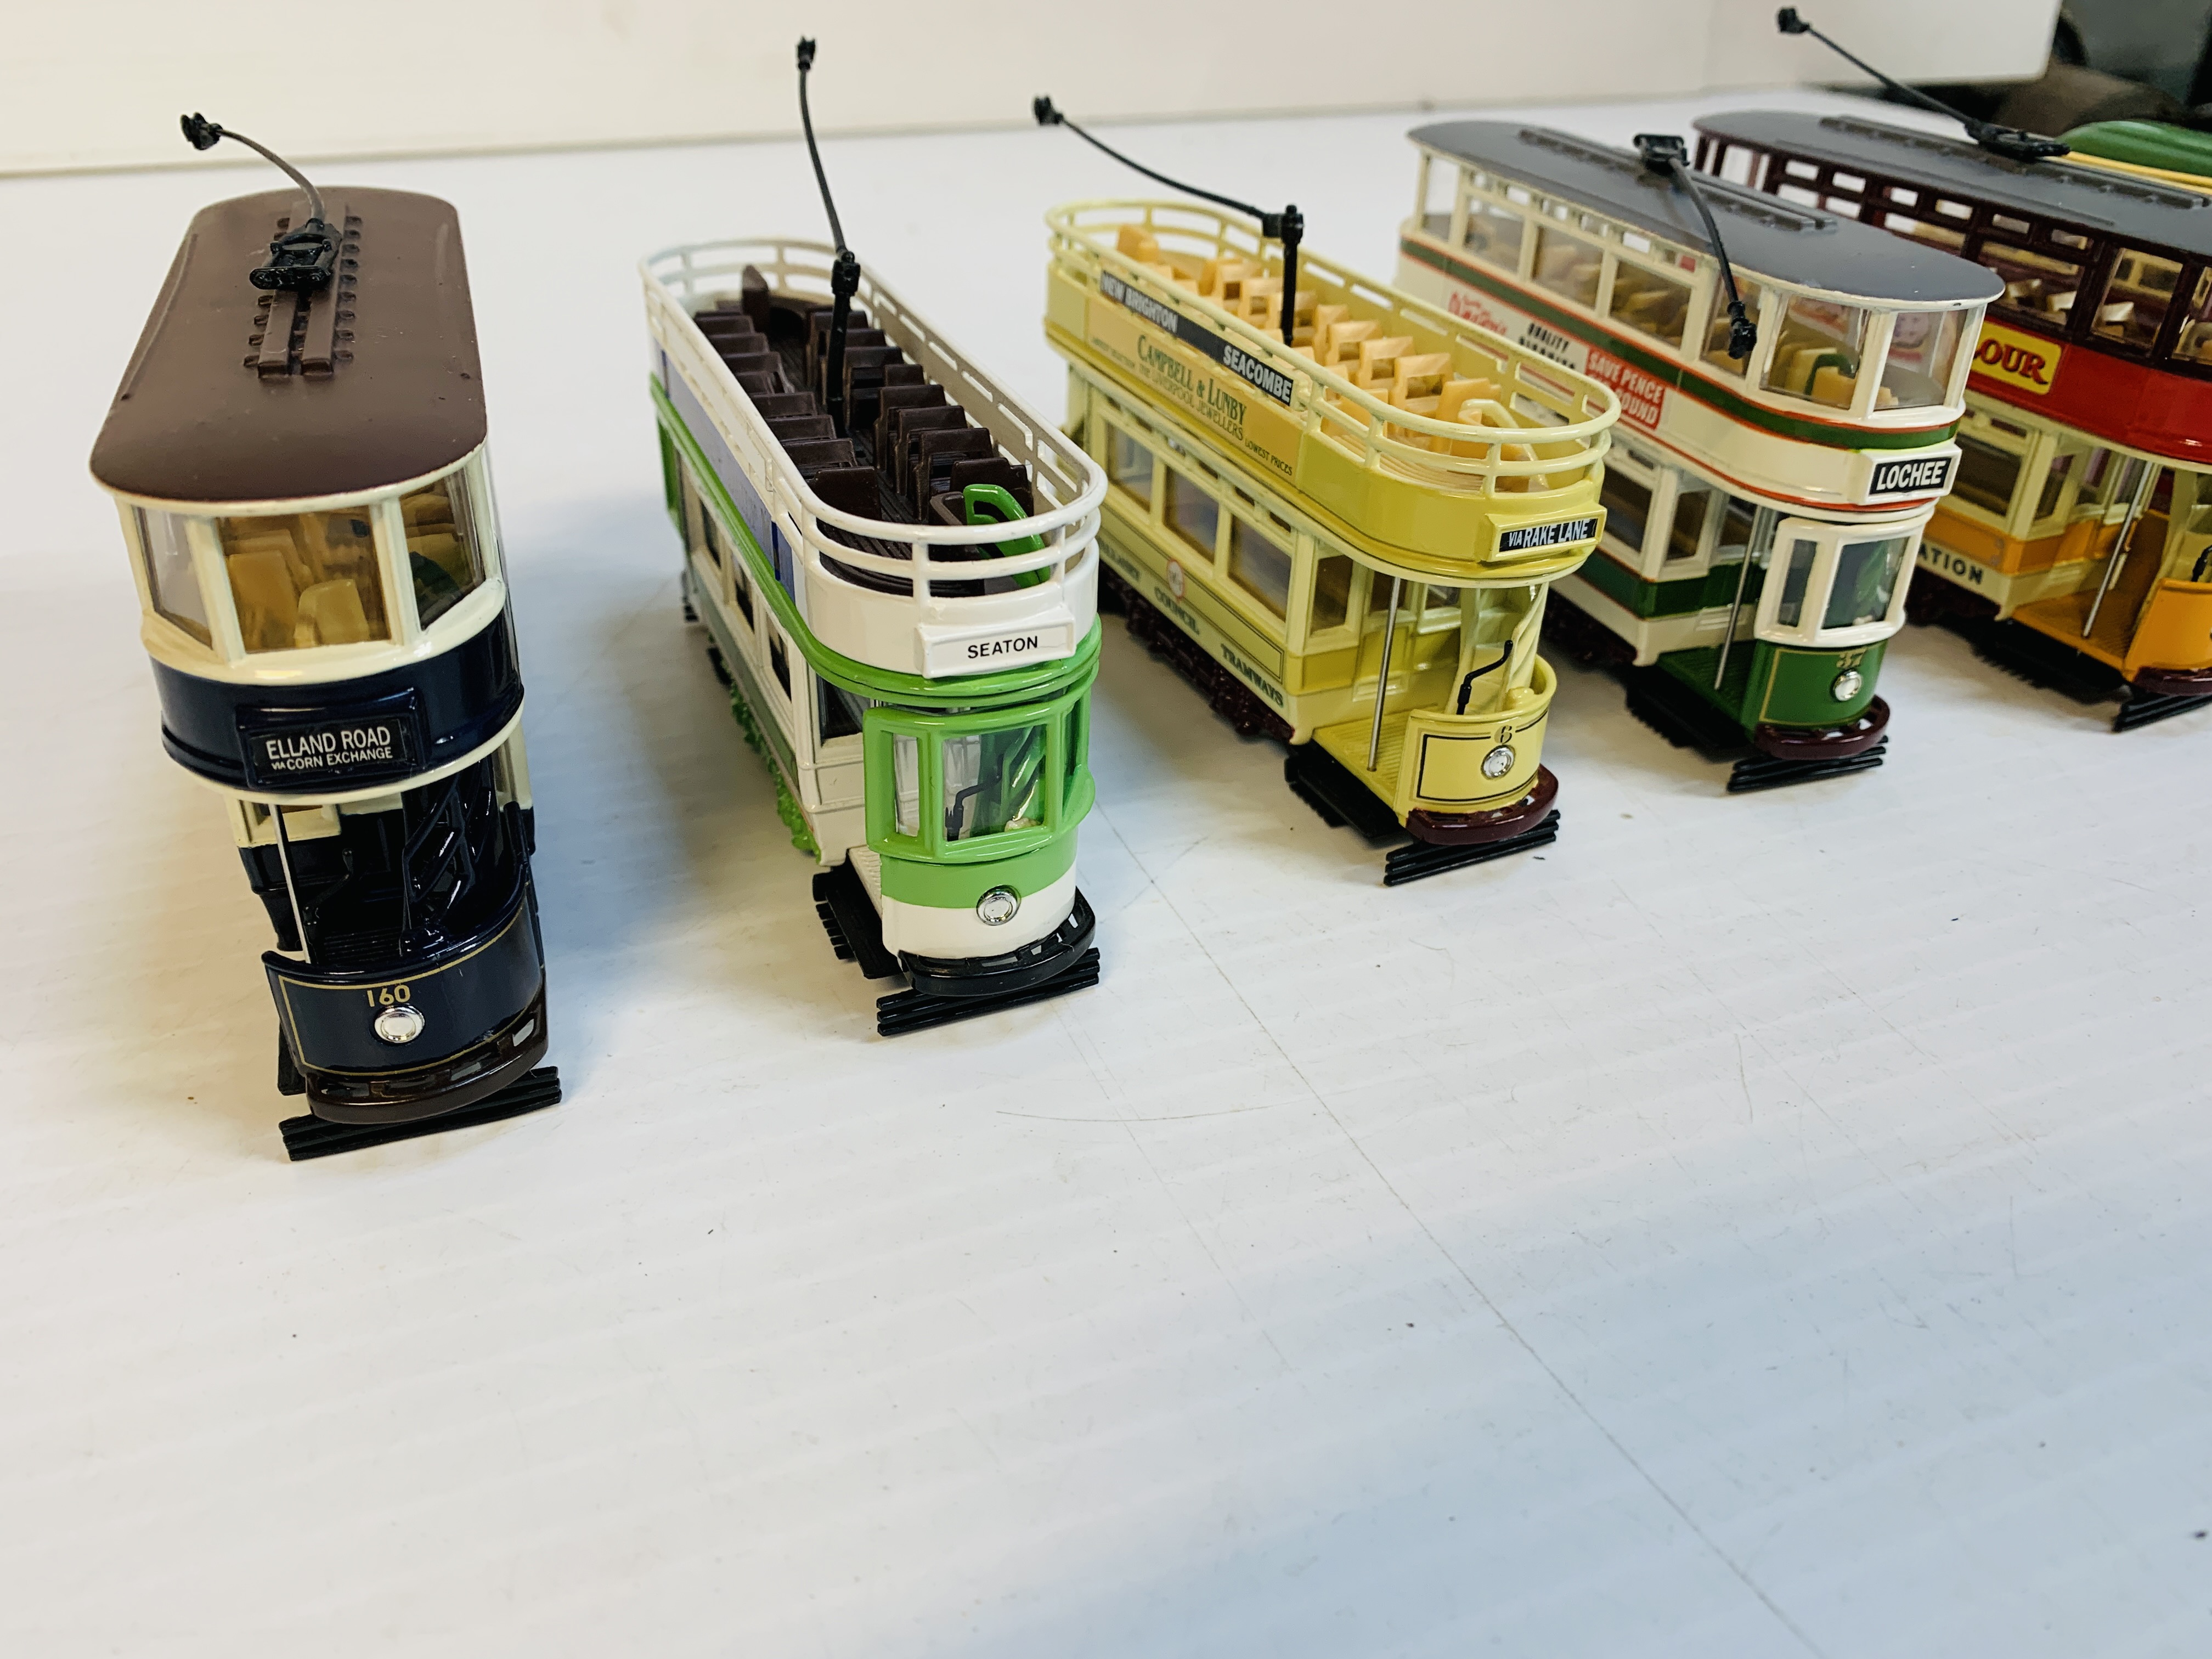 Seven trolley buses - Image 2 of 3